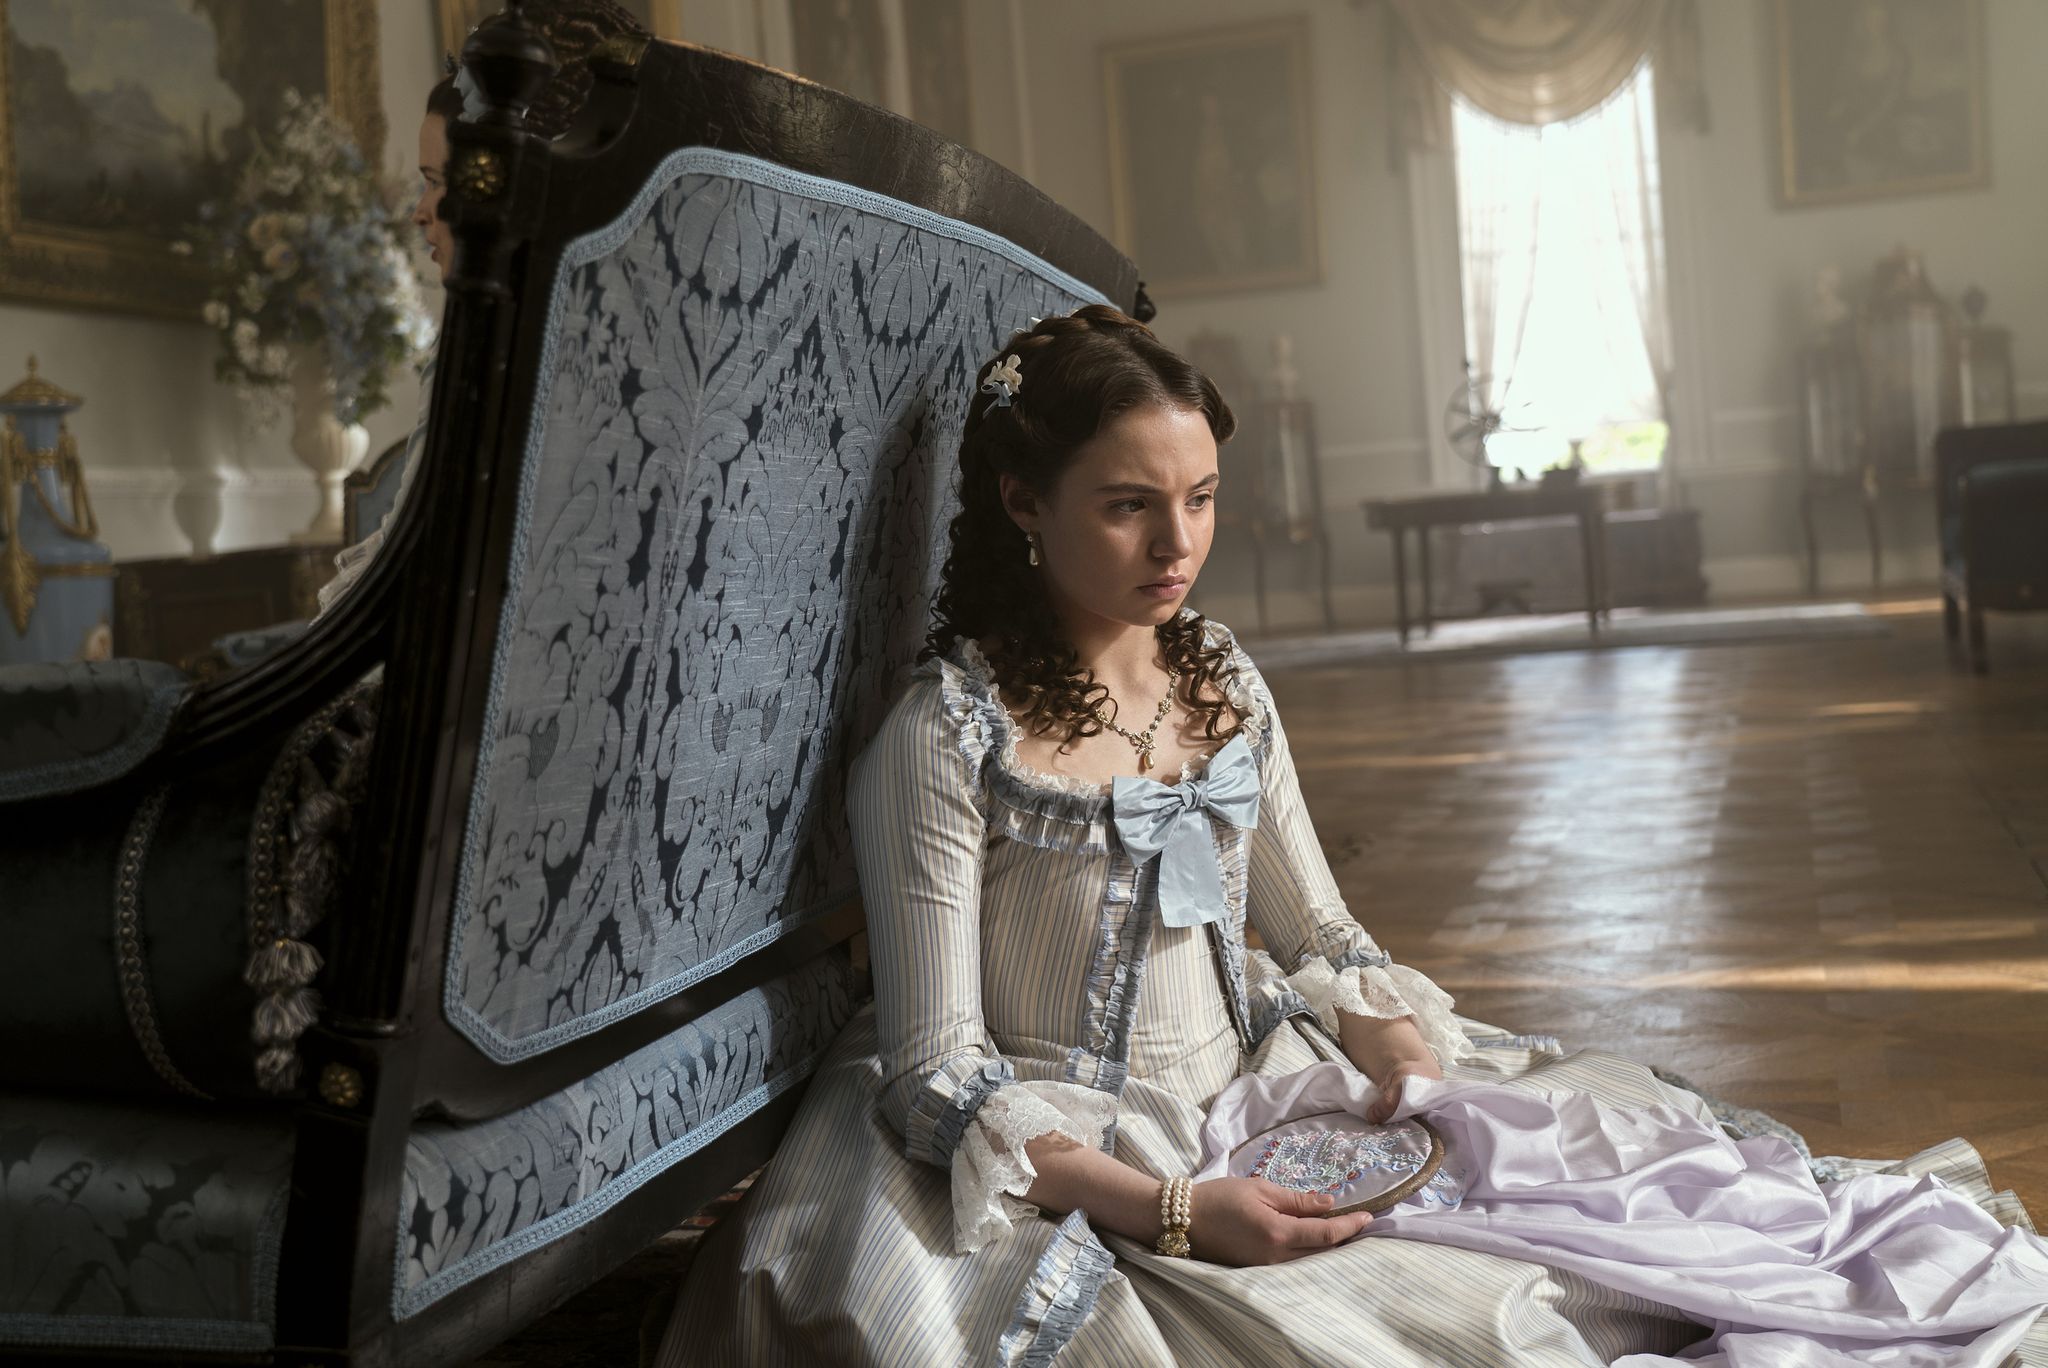 queen charlotte a bridgerton story connie jenkins greig as young violet ledger in episode 103 of queen charlotte a bridgerton story cr liam danielnetflix © 2023